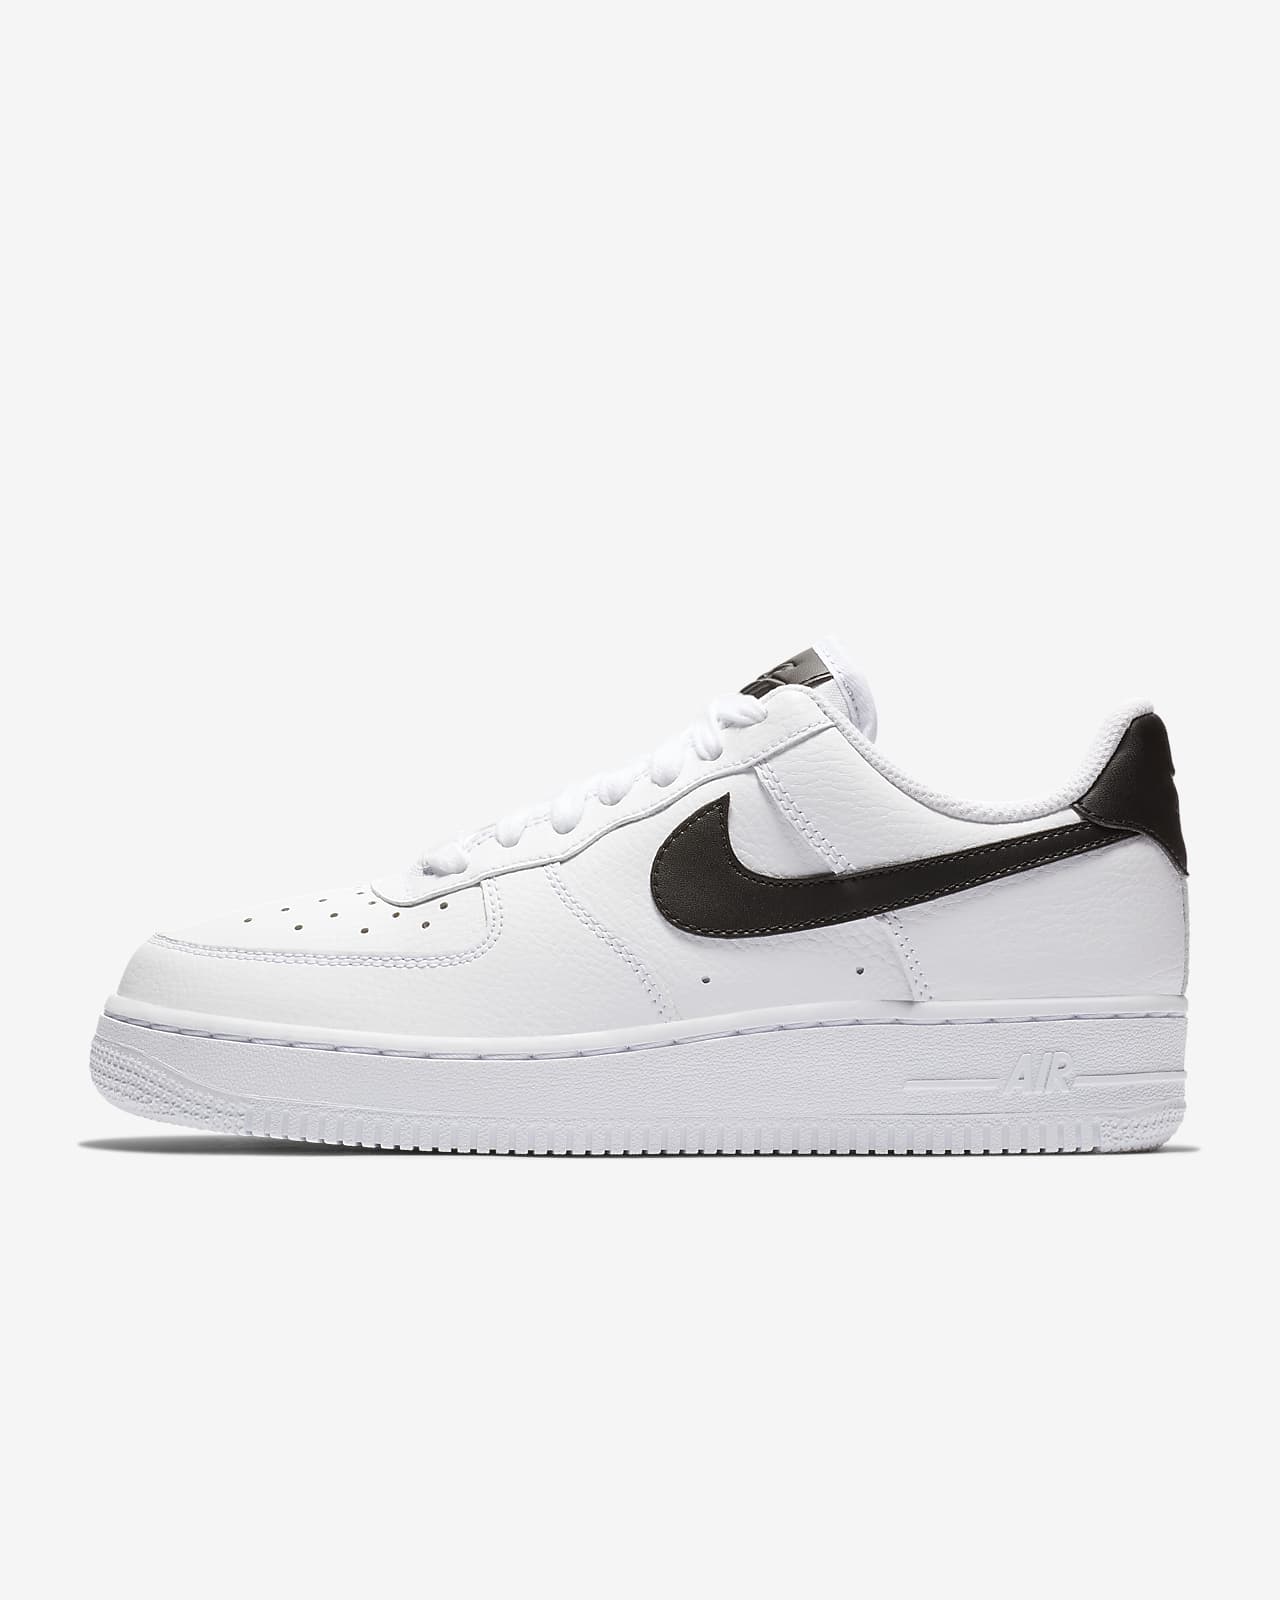 nike air force blancos con negro